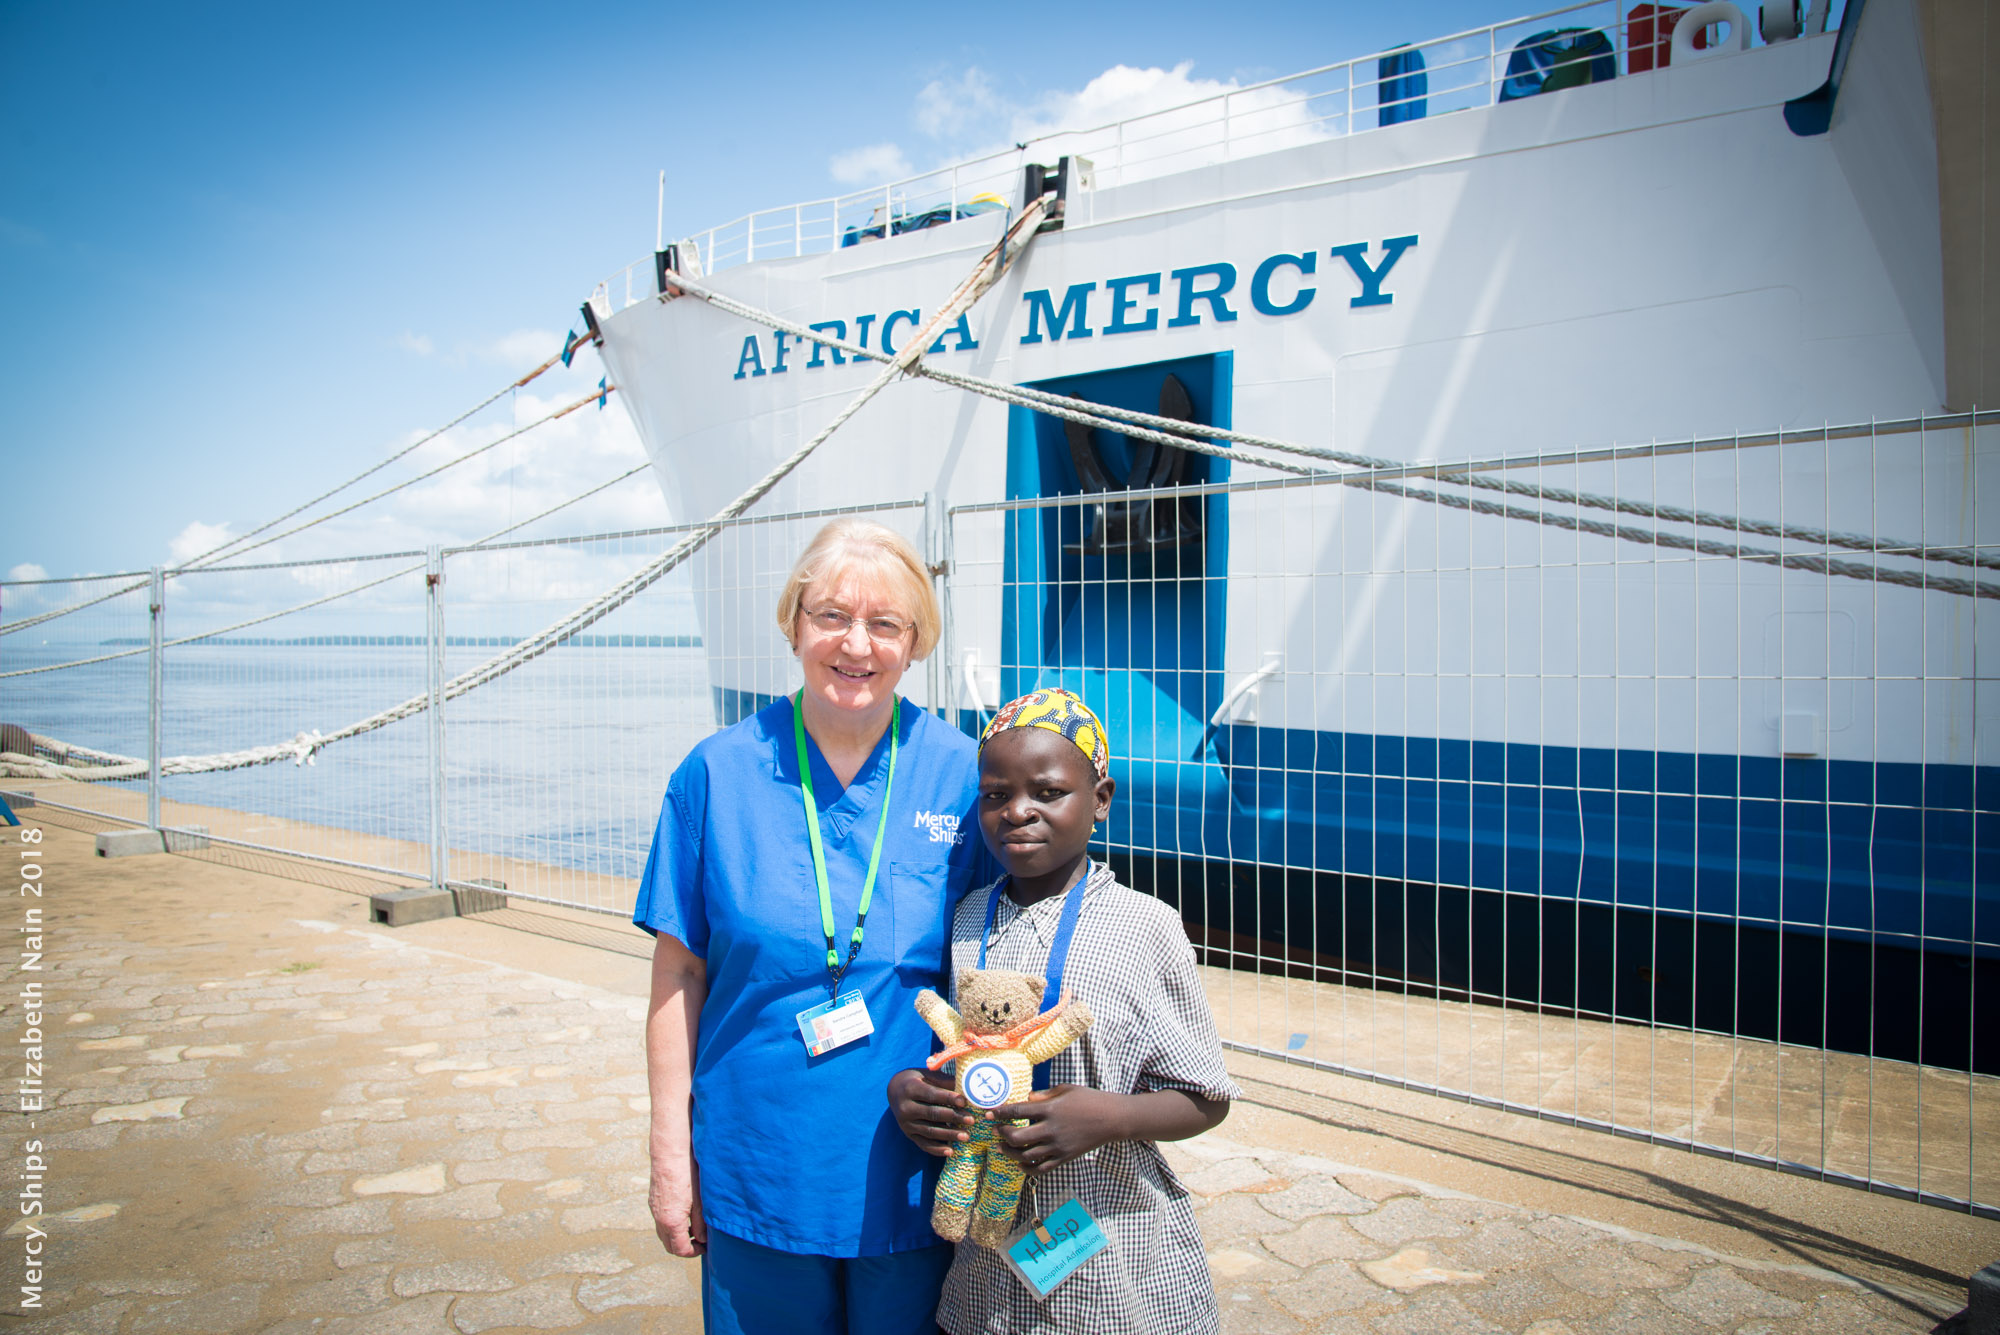 Sandra Campbell from Ellon will volunteer with Mercy Ships